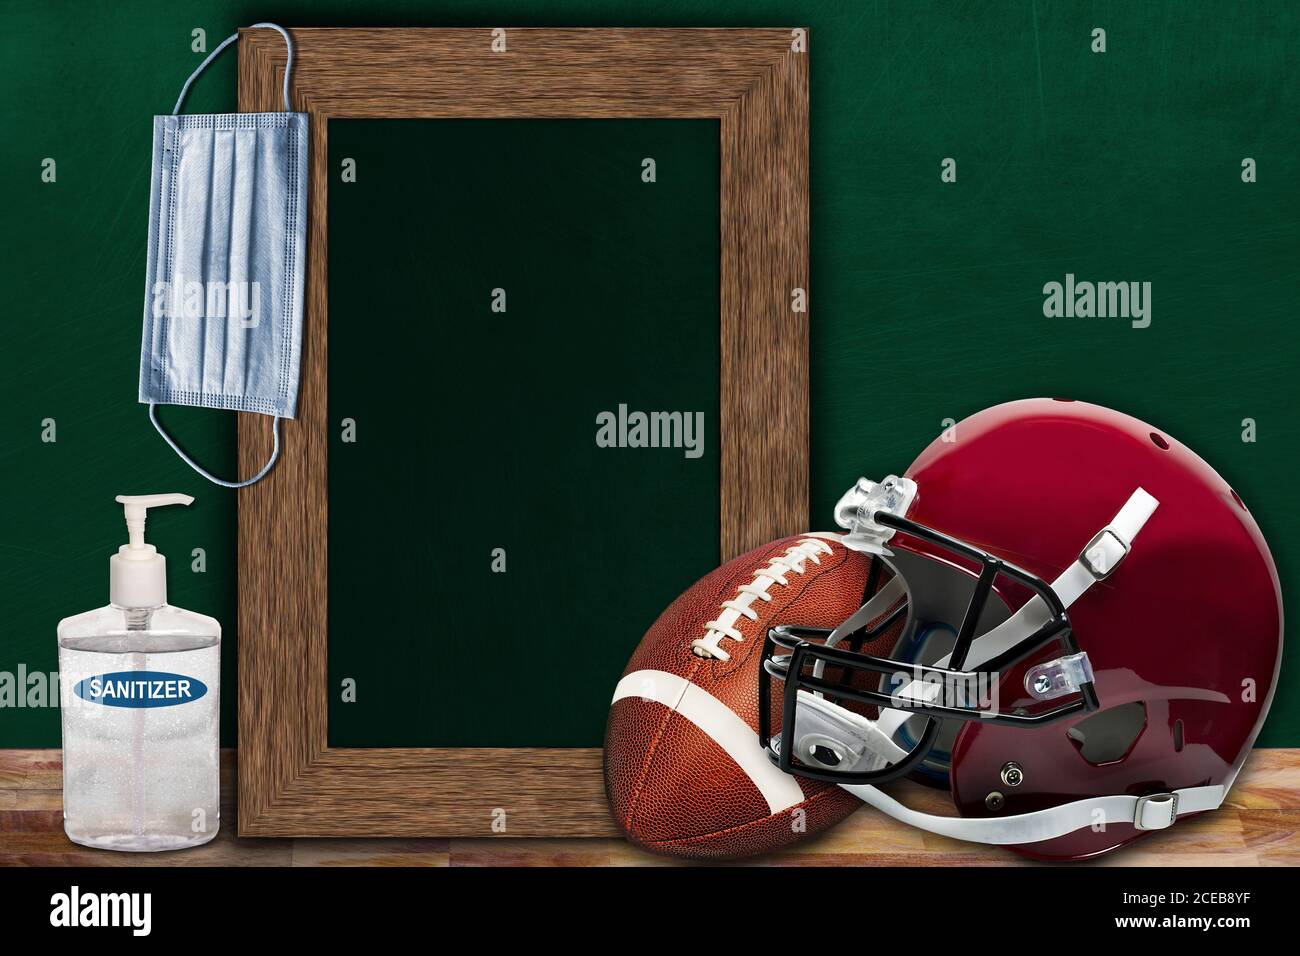 COVID-19 new normal sports concept in a classroom setting showing framed chalkboard with copy space and American football and helmet on wooden table. Stock Photo